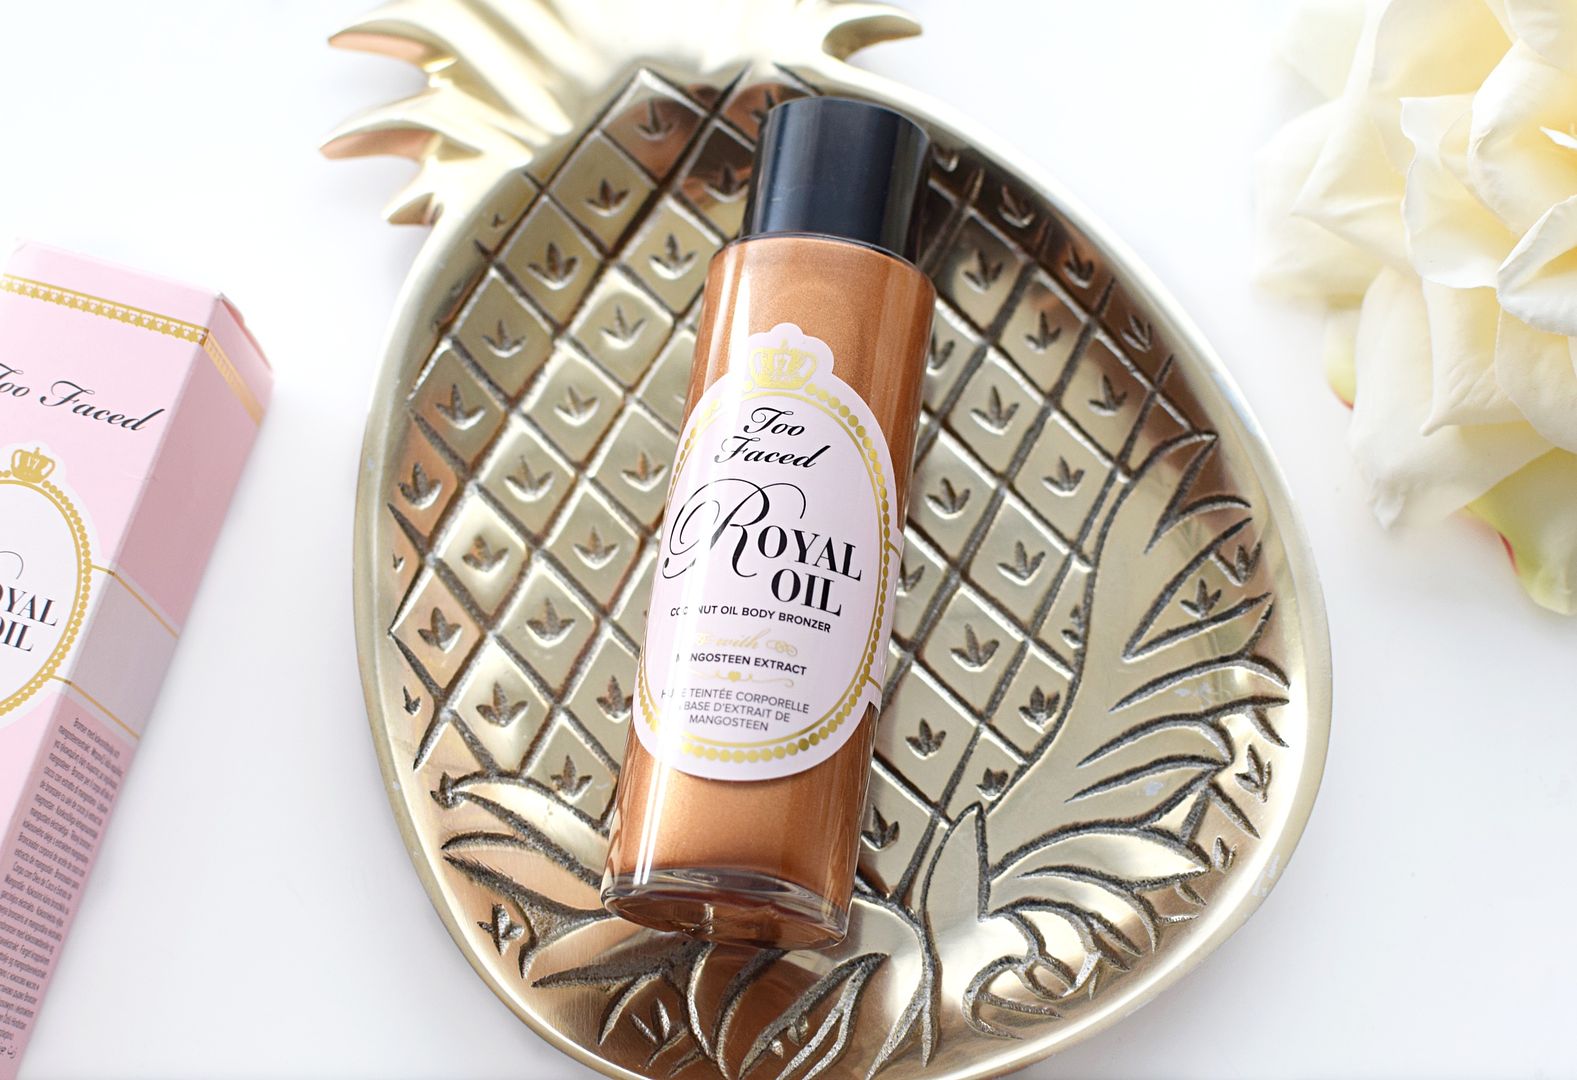 Too Faced Royal Oil Review